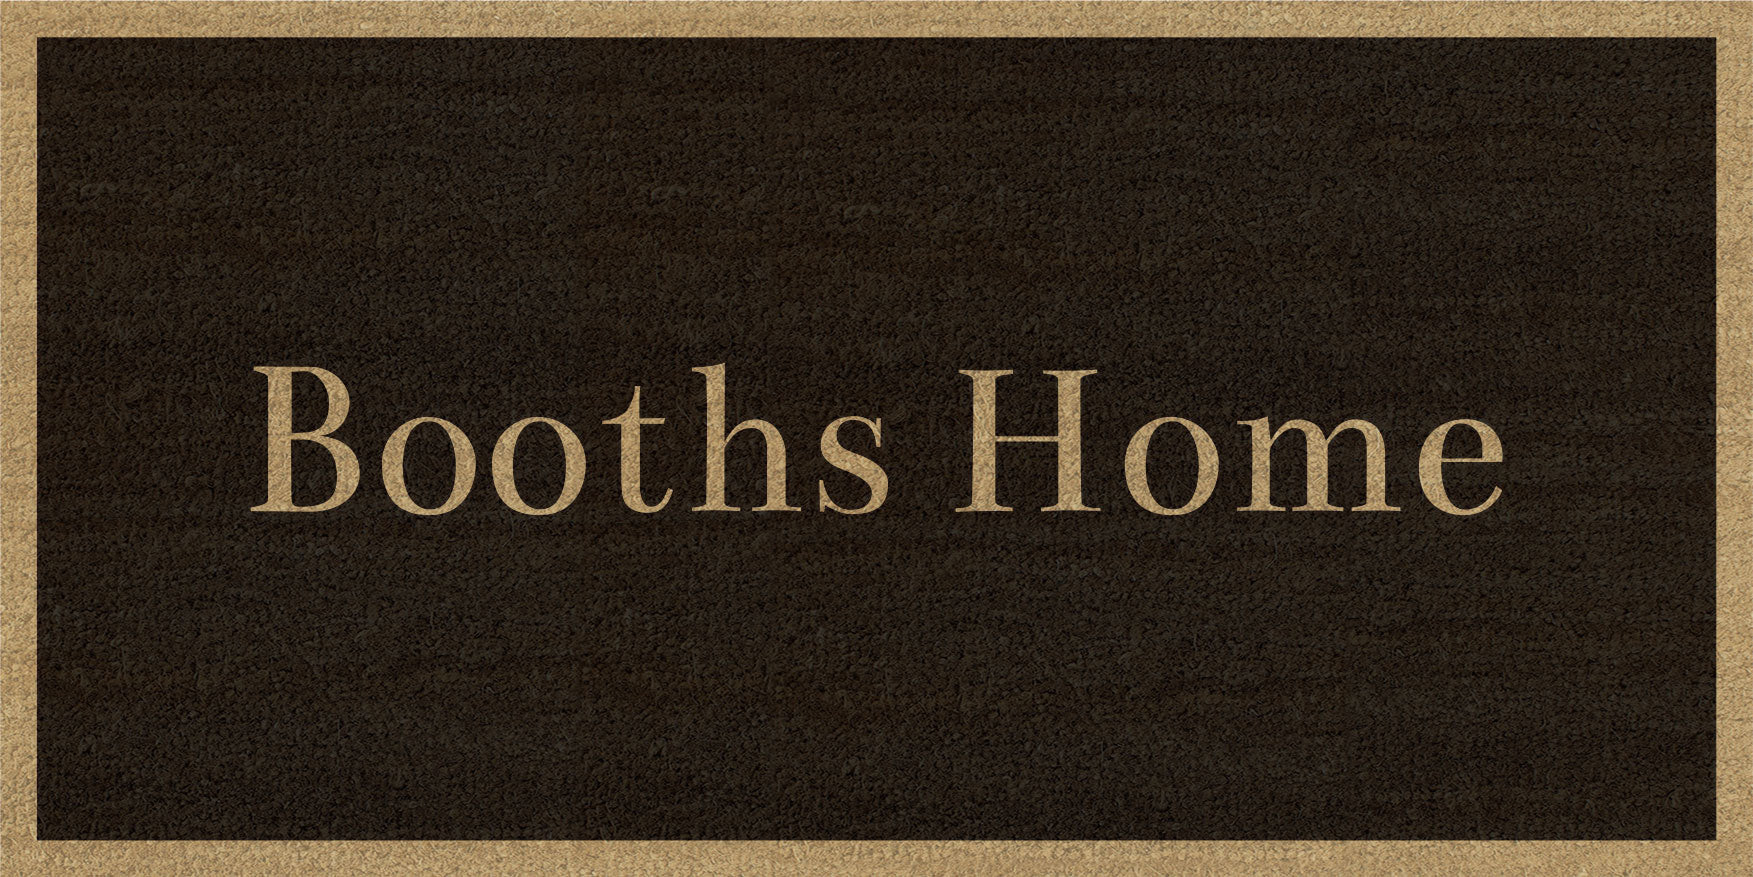 Booths Home §